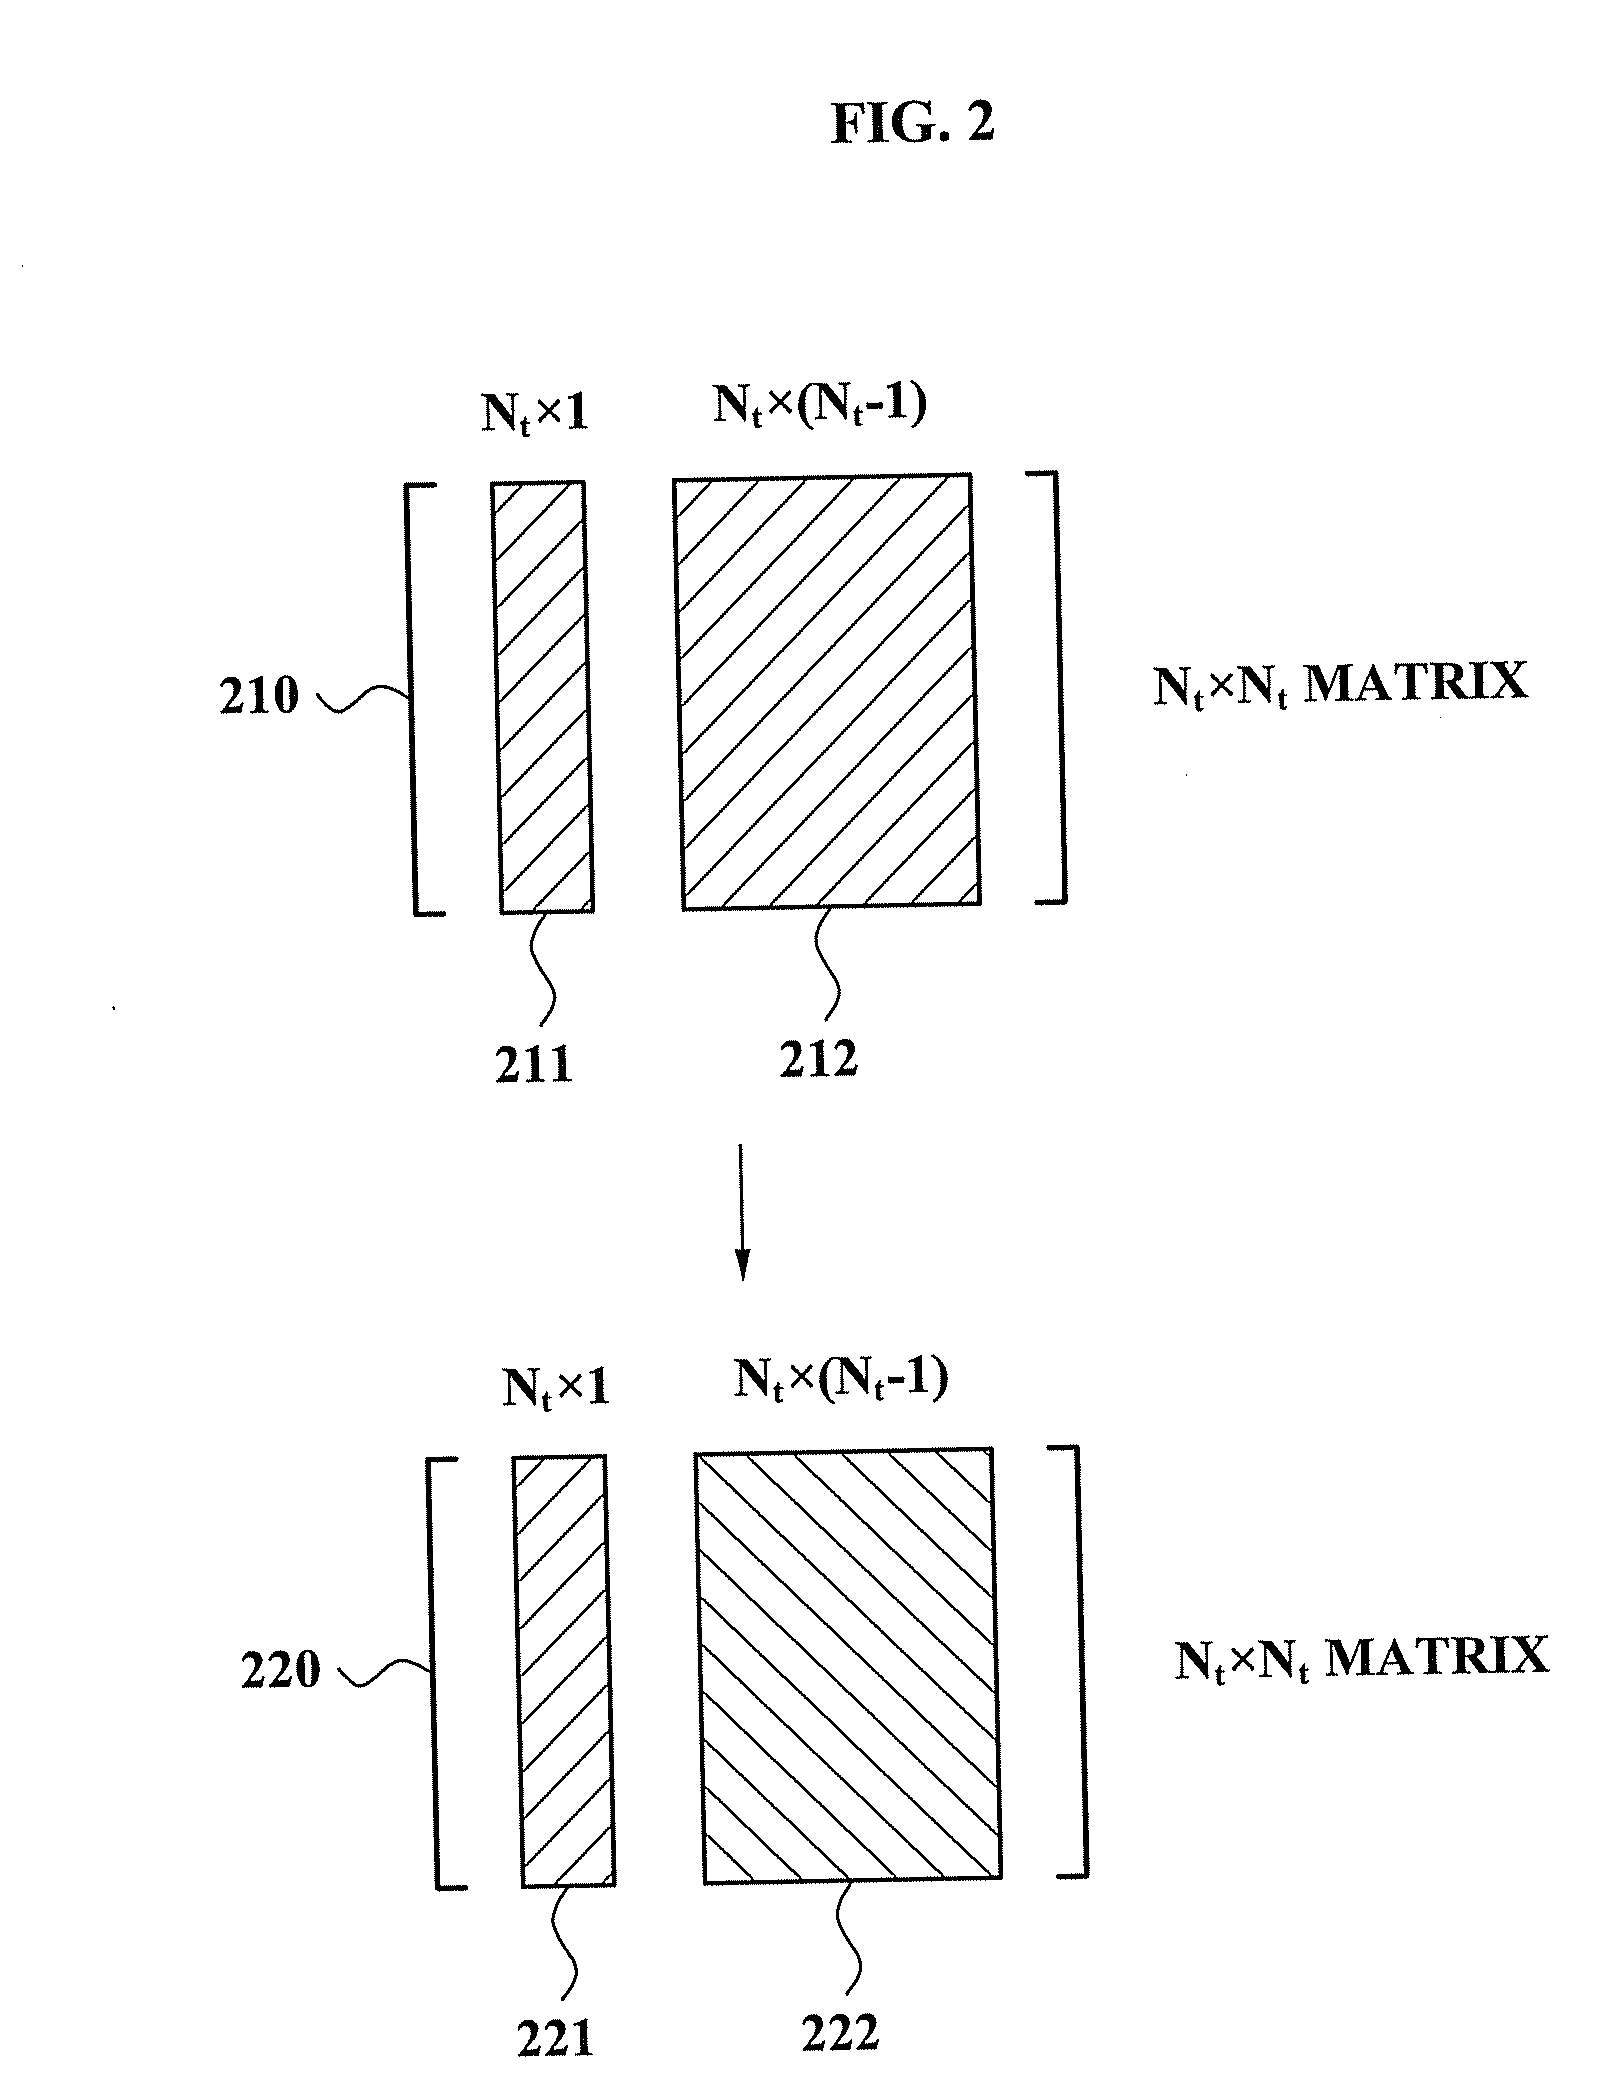 Apparatus for generating precoding matrix codebook for MIMO system and method of the same